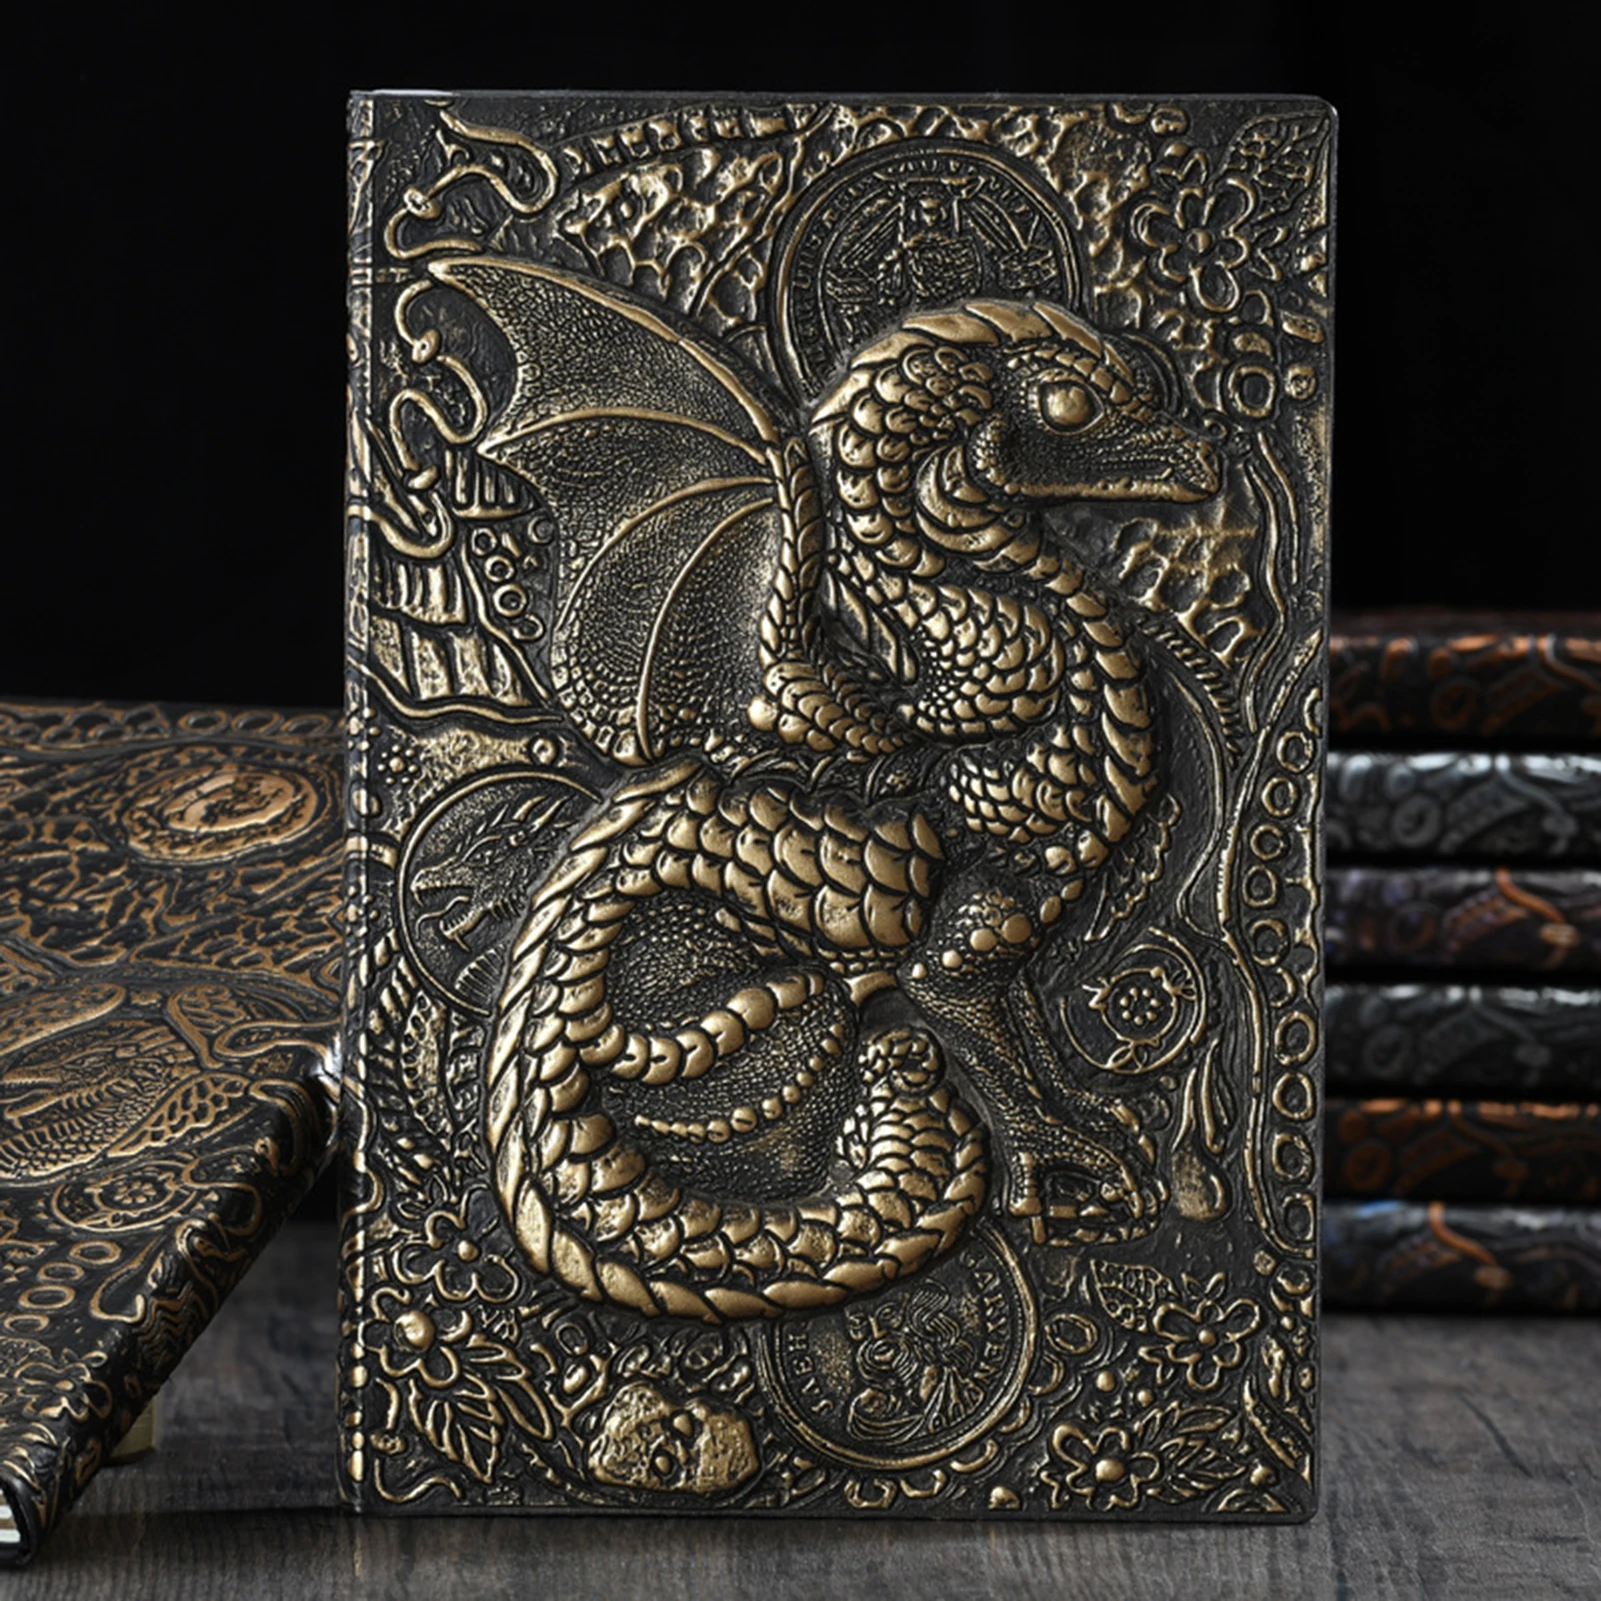 3D Flying Dragon Journal Embossed Writing Notebook Handmade Leather Cover A5 Notebooks Gift for Men Travel Thoughts Notes Poetry